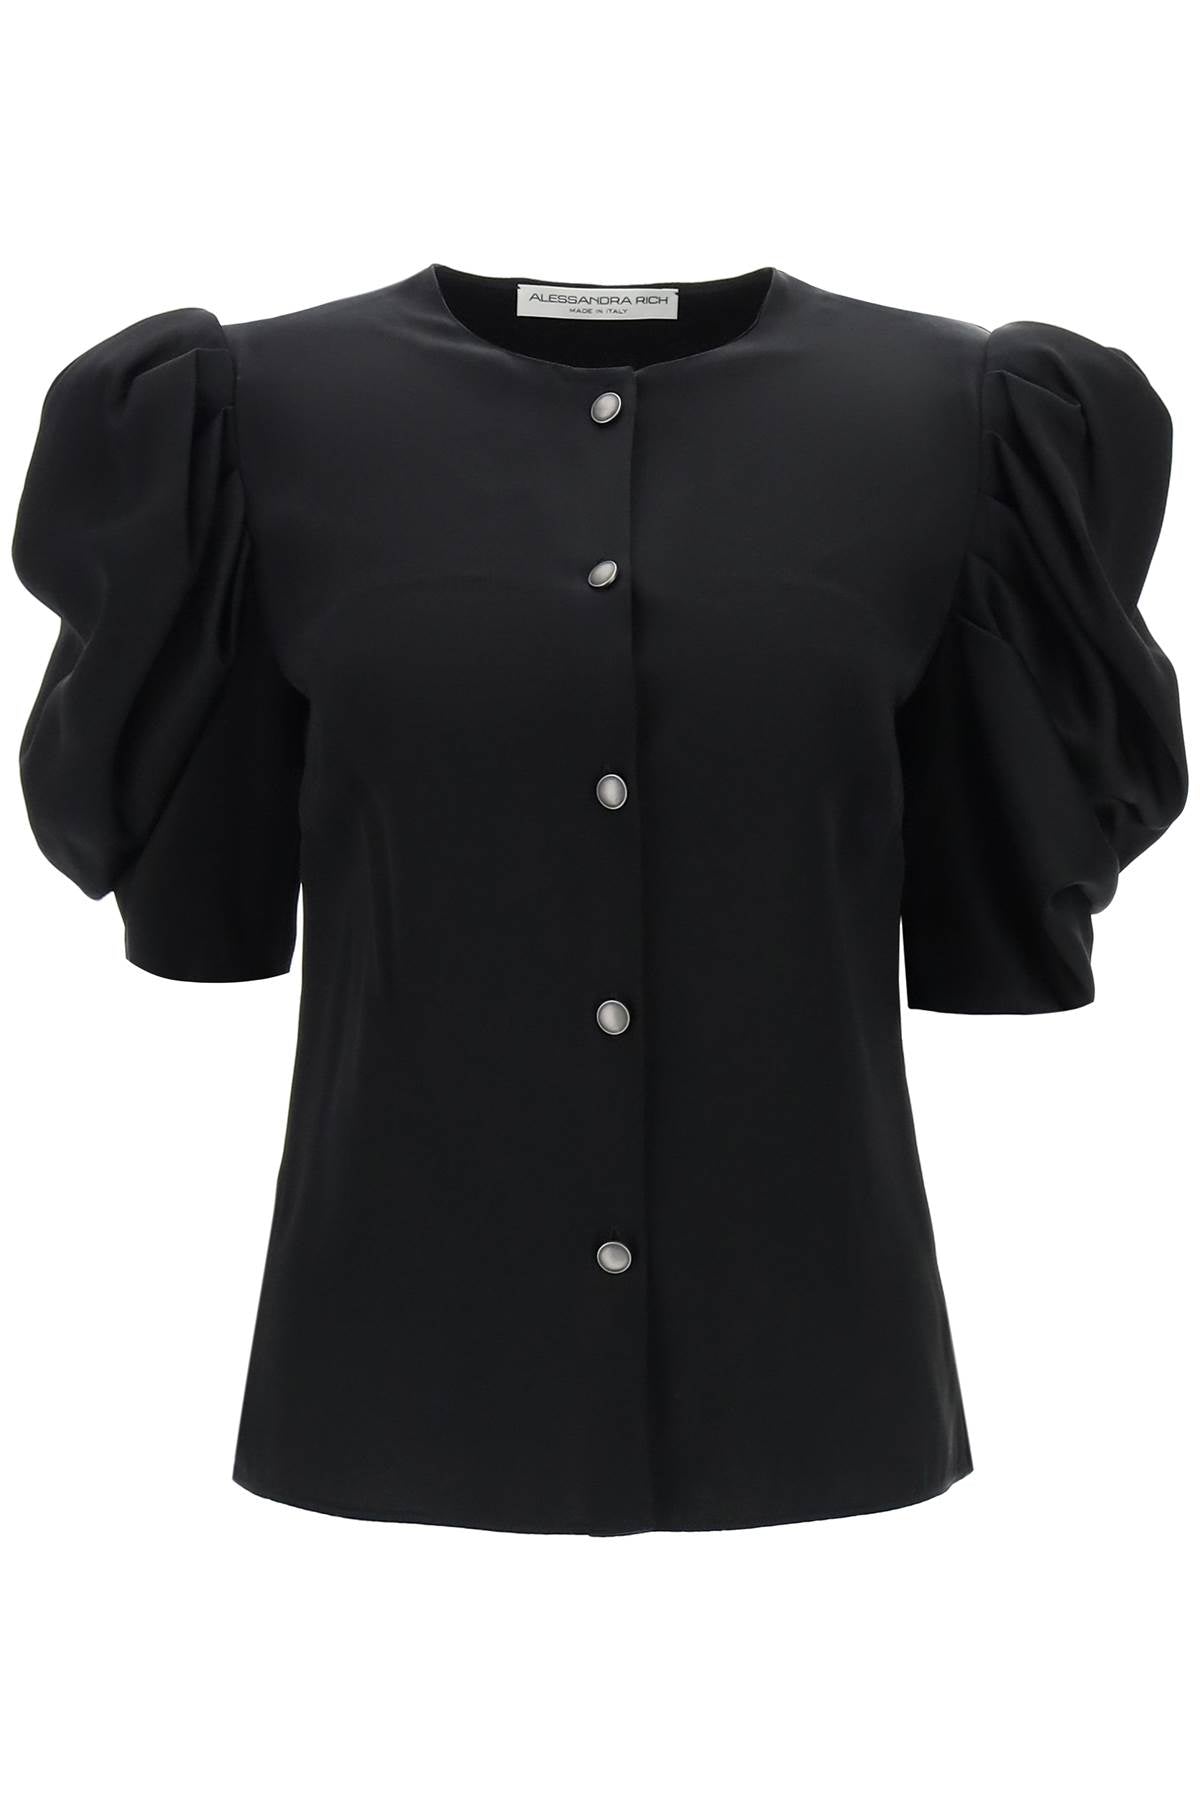 Alessandra rich envers satin blouse with bouffant sleeves-women > clothing > shirts and blouses > shirts-Alessandra Rich-Urbanheer